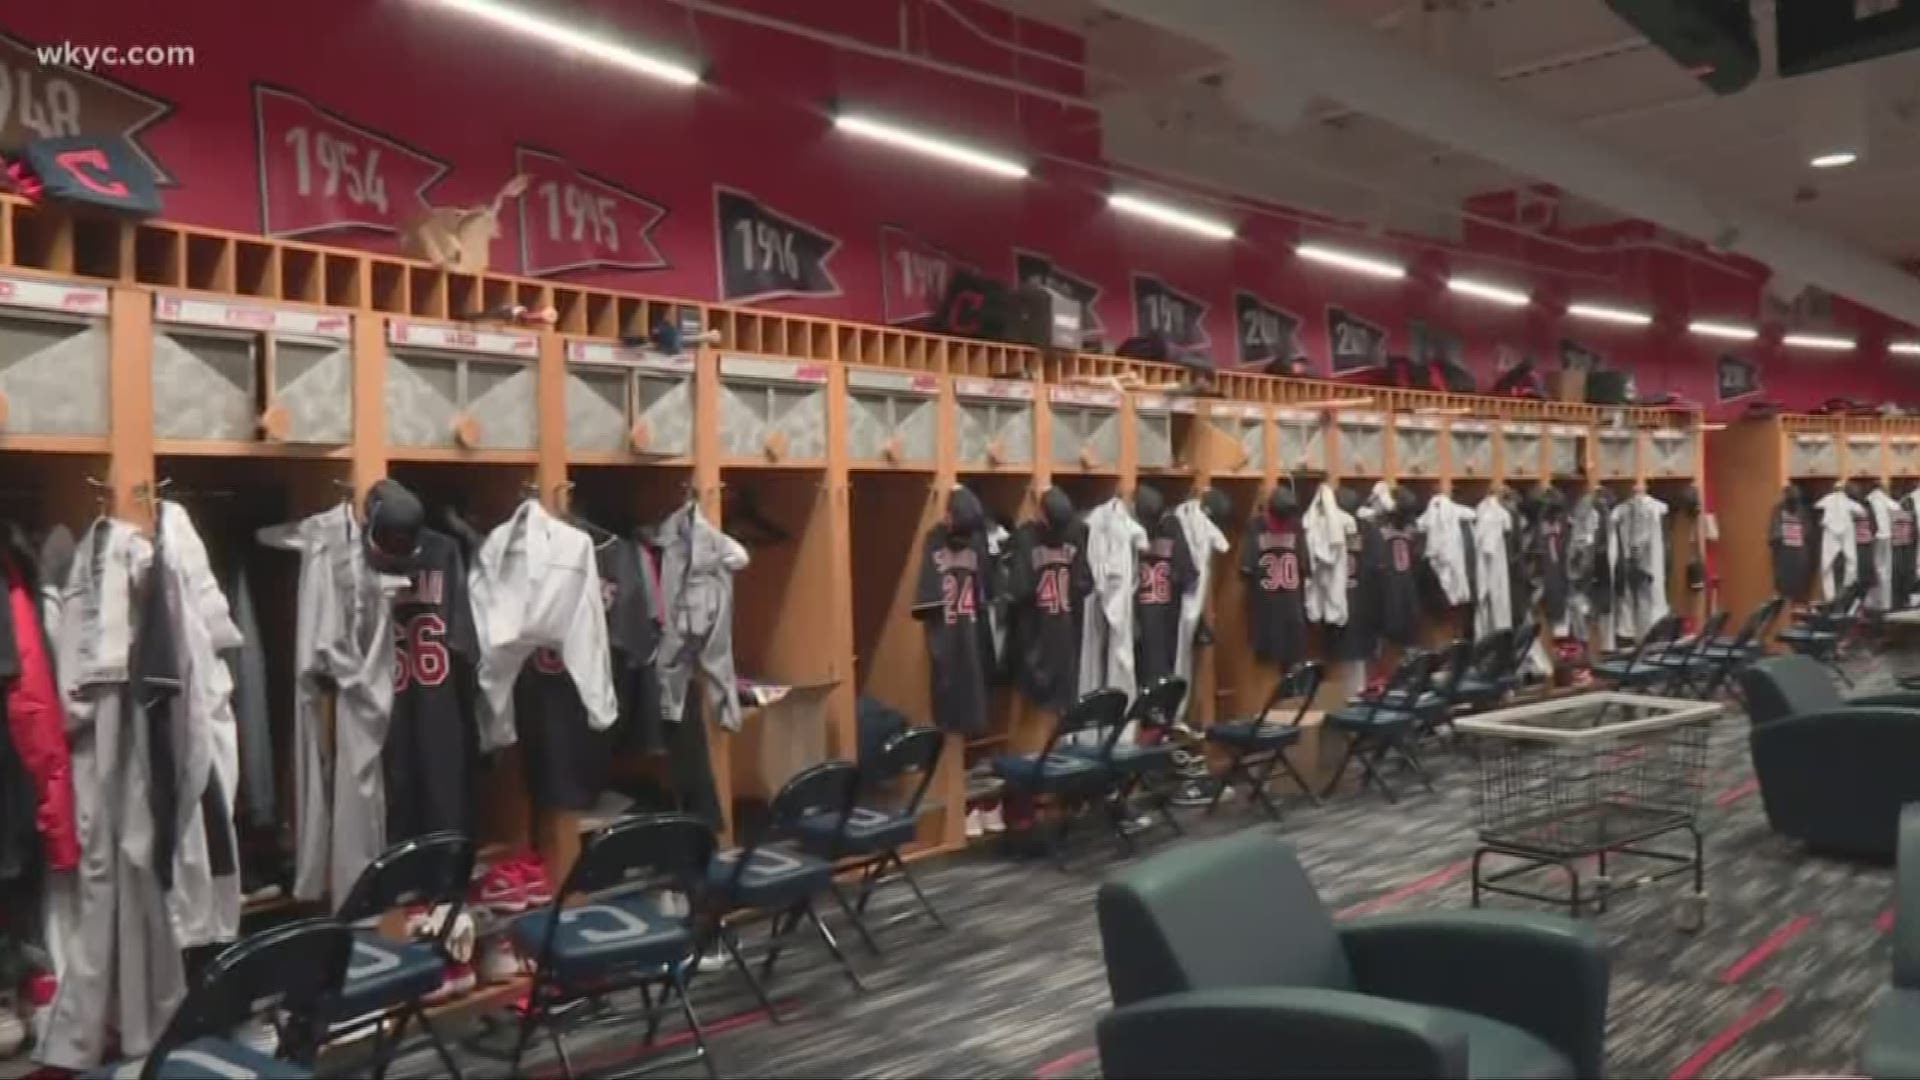 Dave Chudowsky is in Goodyear, Arizona, home of the Cleveland Indians spring training complex. Take a peek inside the facility as Dave gives you a tour.